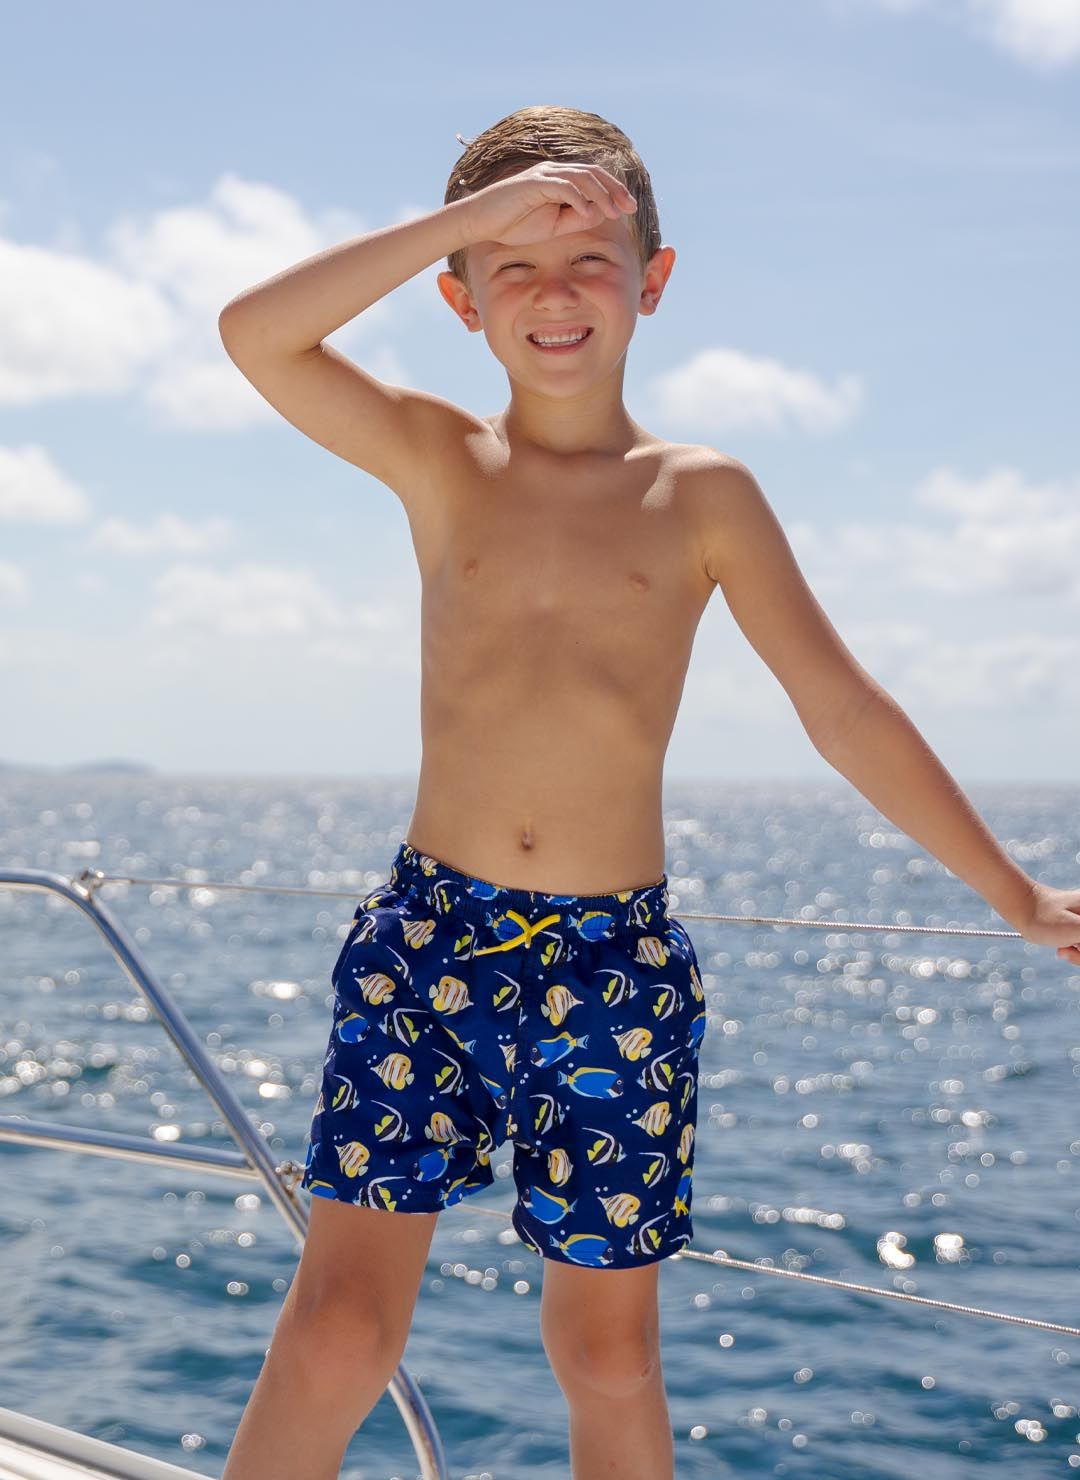 The Jack are essential CAHA CAPO boardshorts in Fish print. Part of the CAHA CAPO men's swimwear collection.